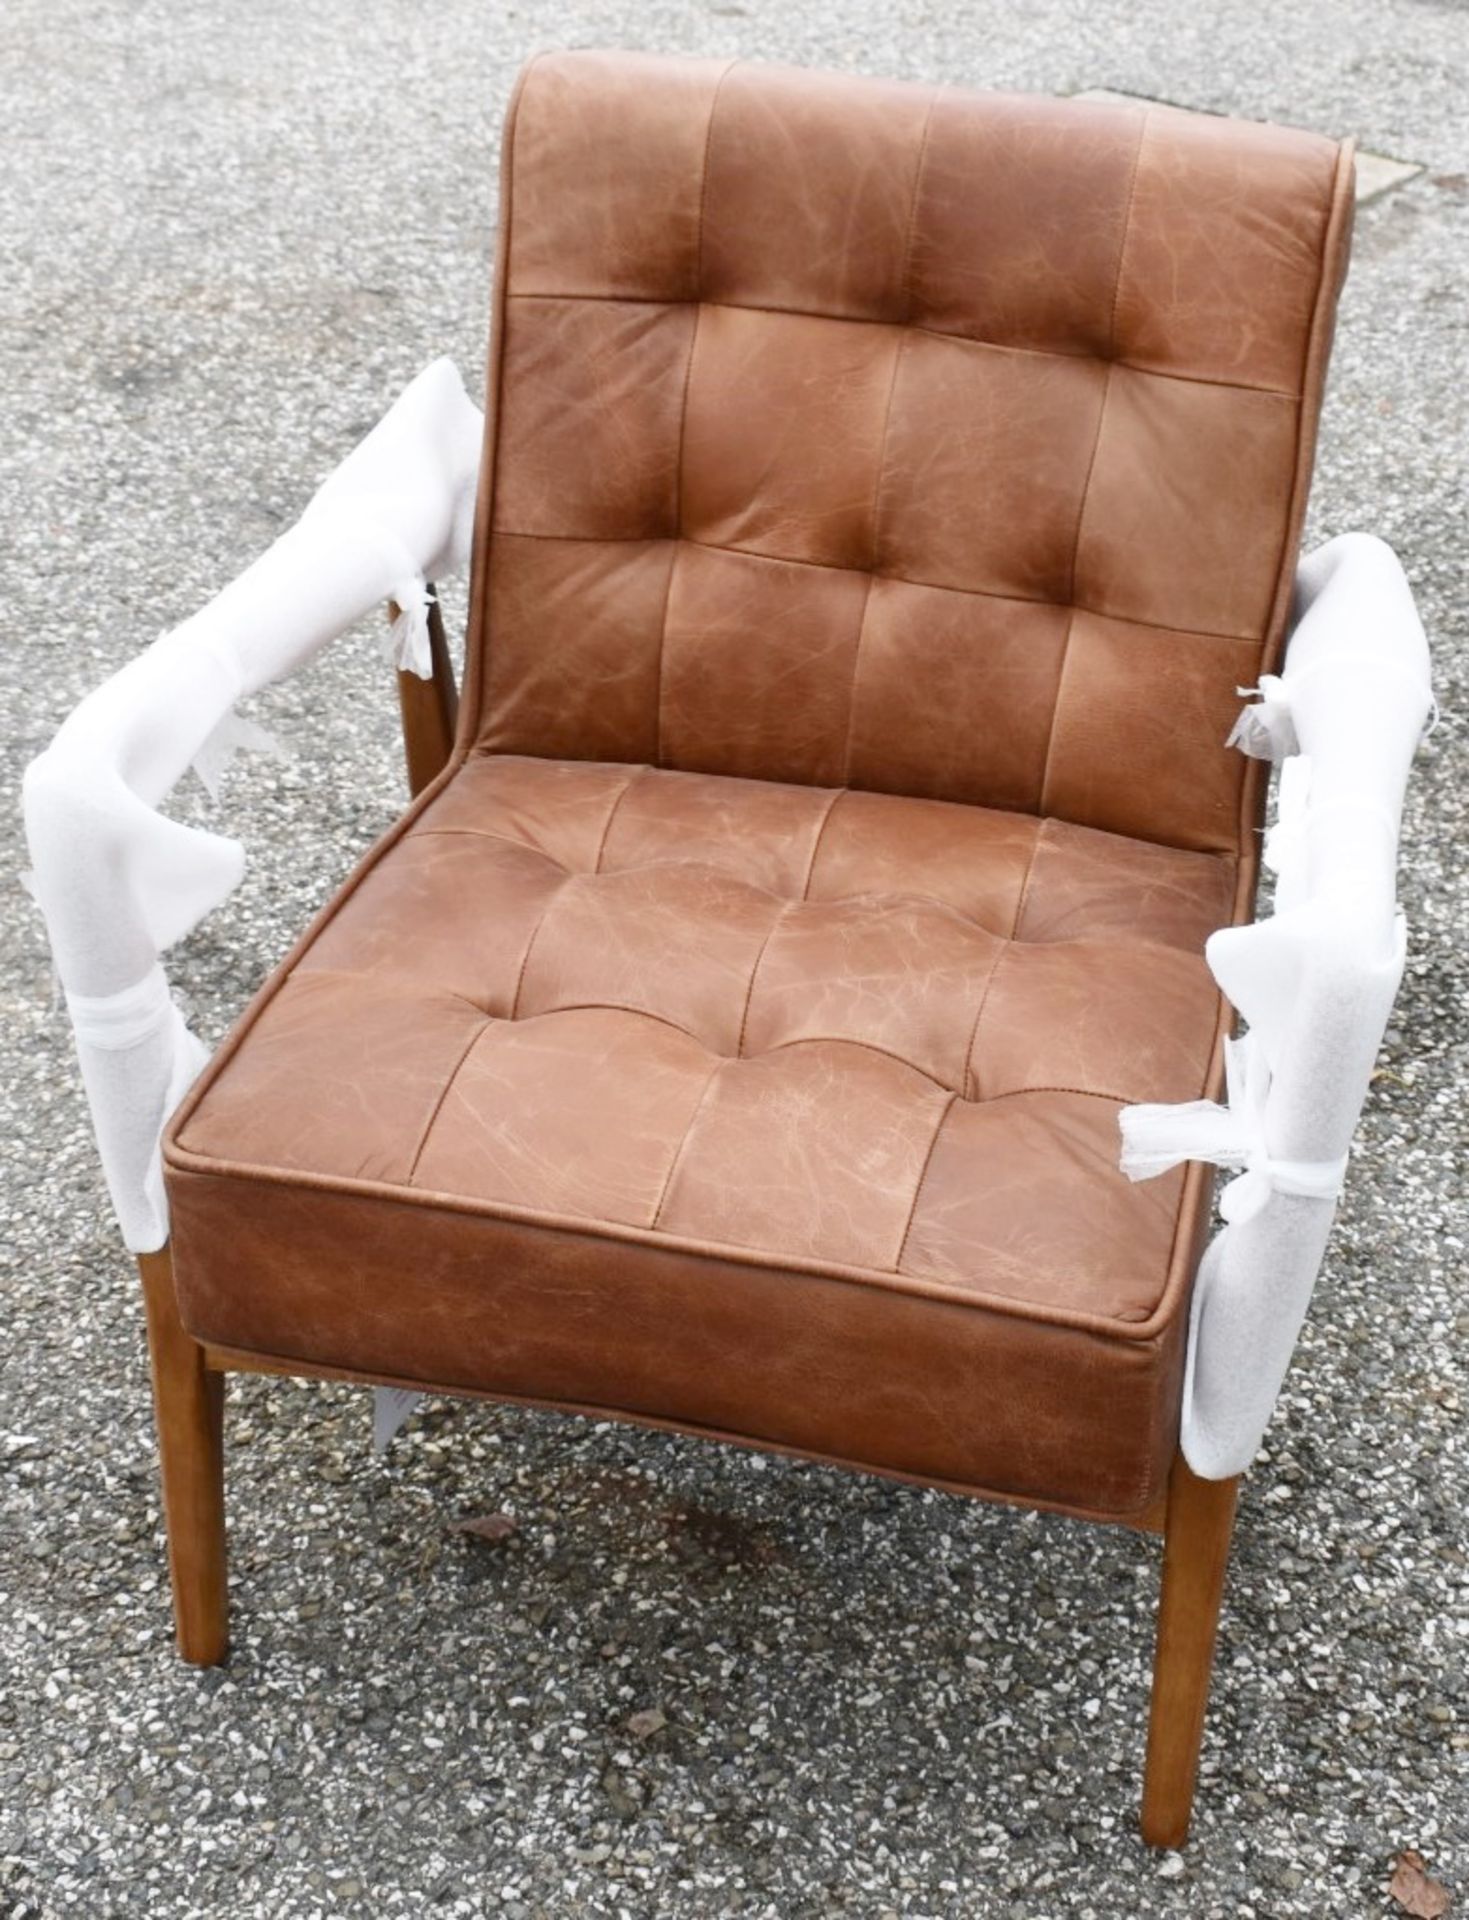 1 x 'Humber' Armchair Upholstered Vintage Brown Leather - New / Unused Stock - CL011 - Location: